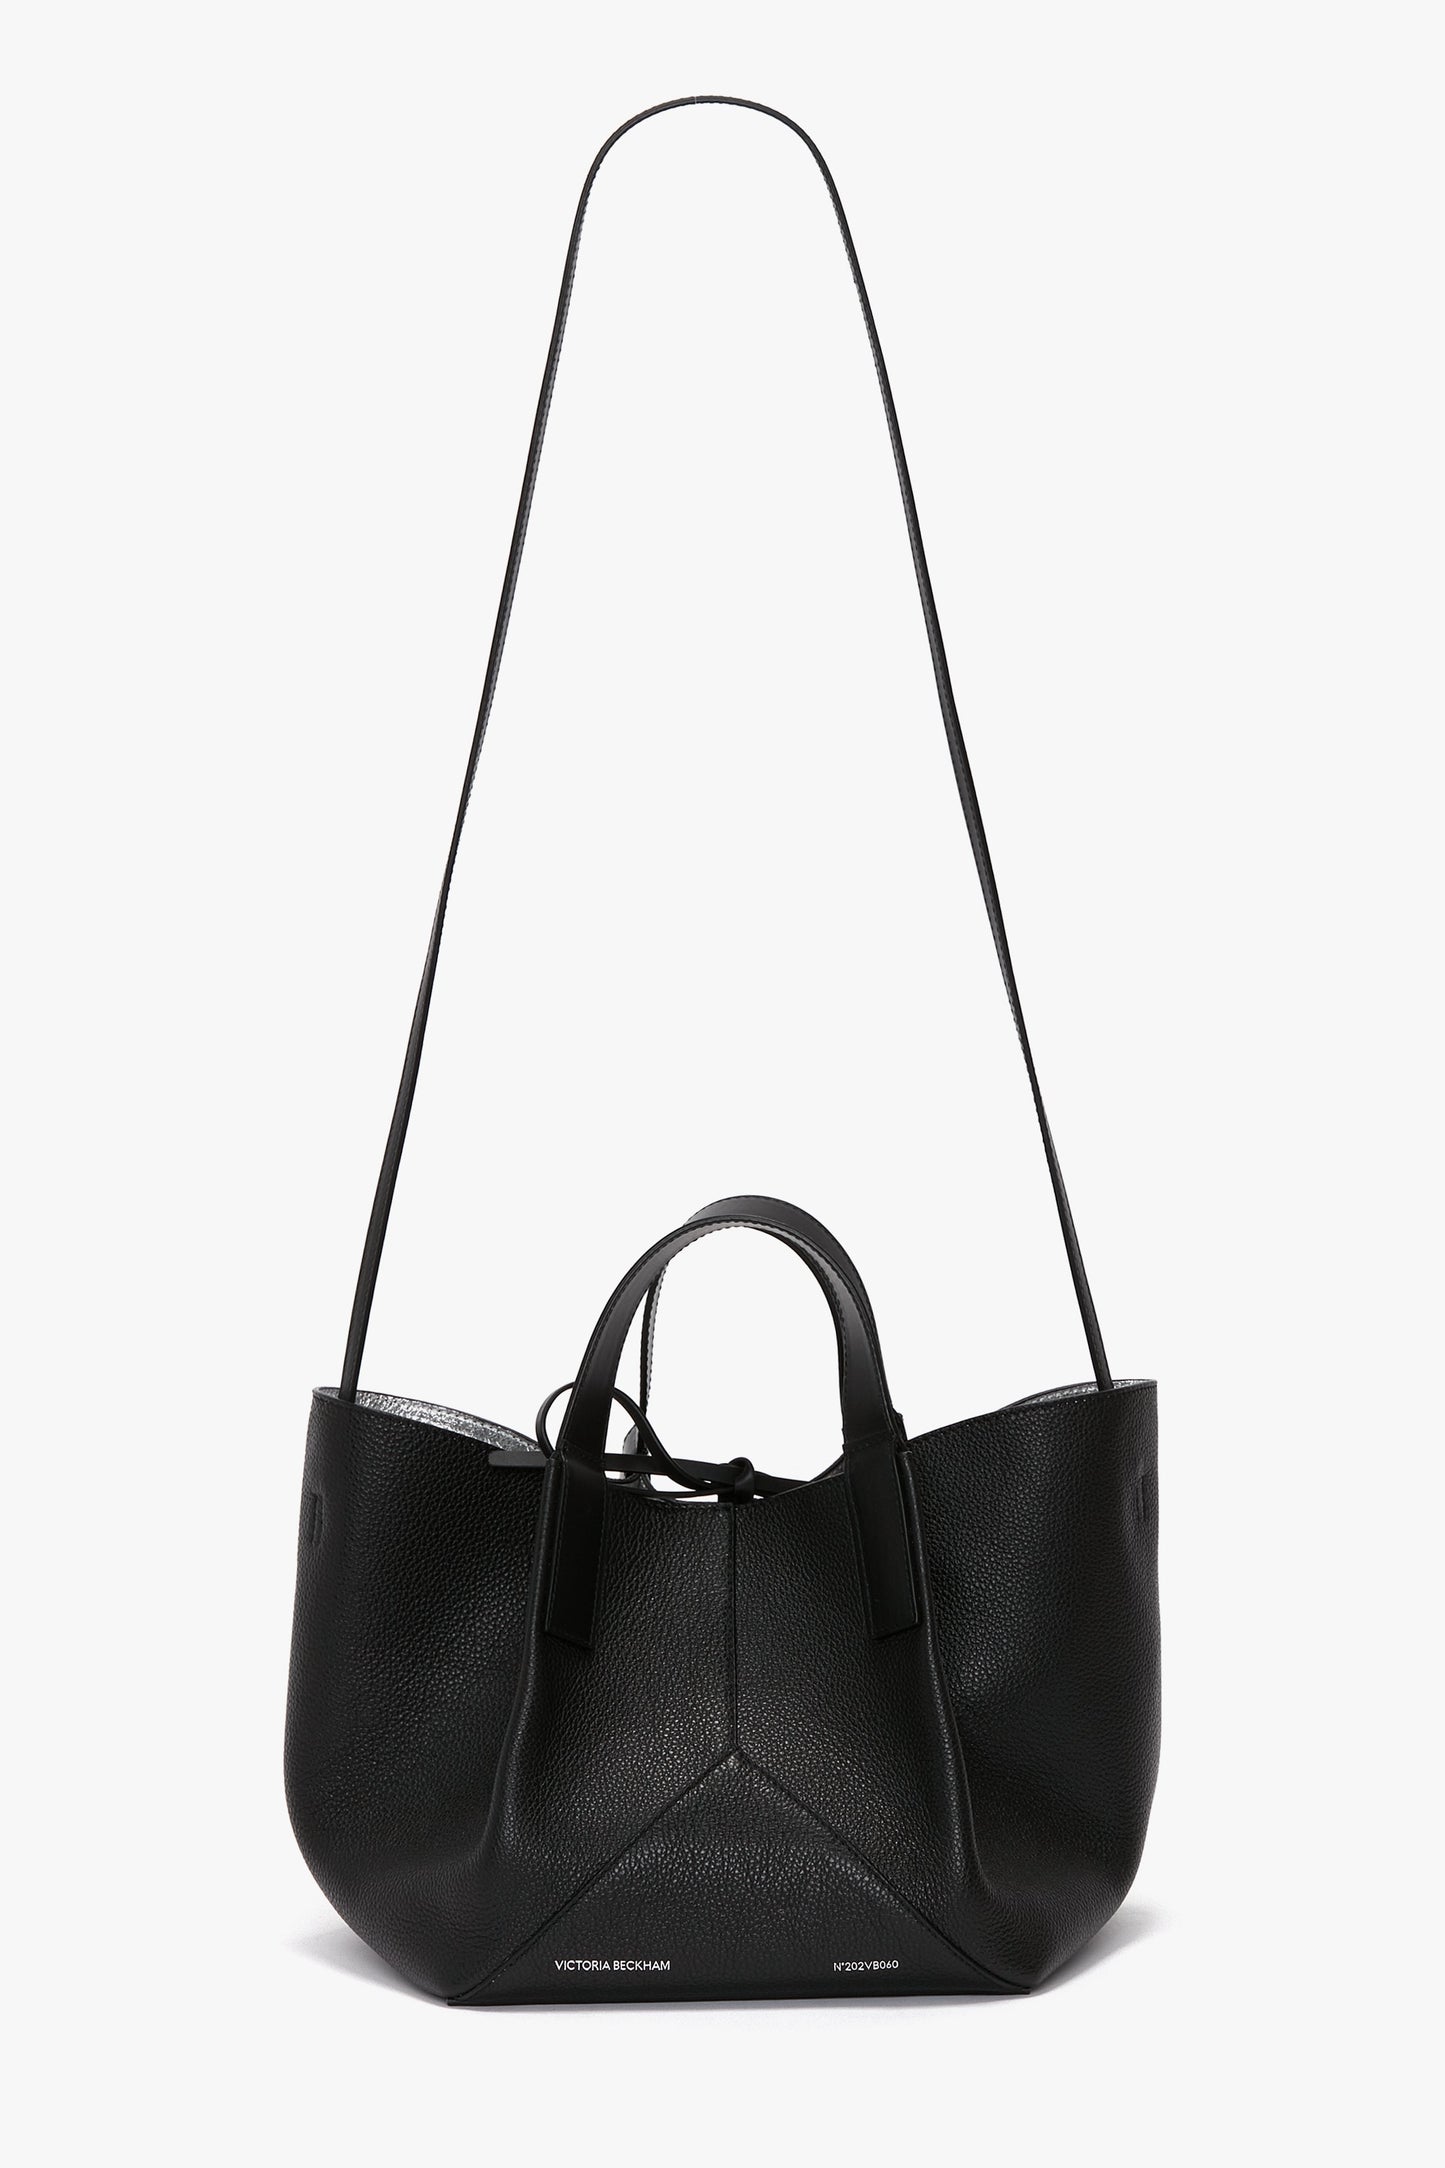 A black leather W11 Mini Tote Bag In Black Leather from Victoria Beckham with rounded edges, two short handles, and a long shoulder strap crafted from grainy calf leather, displayed against a white background.